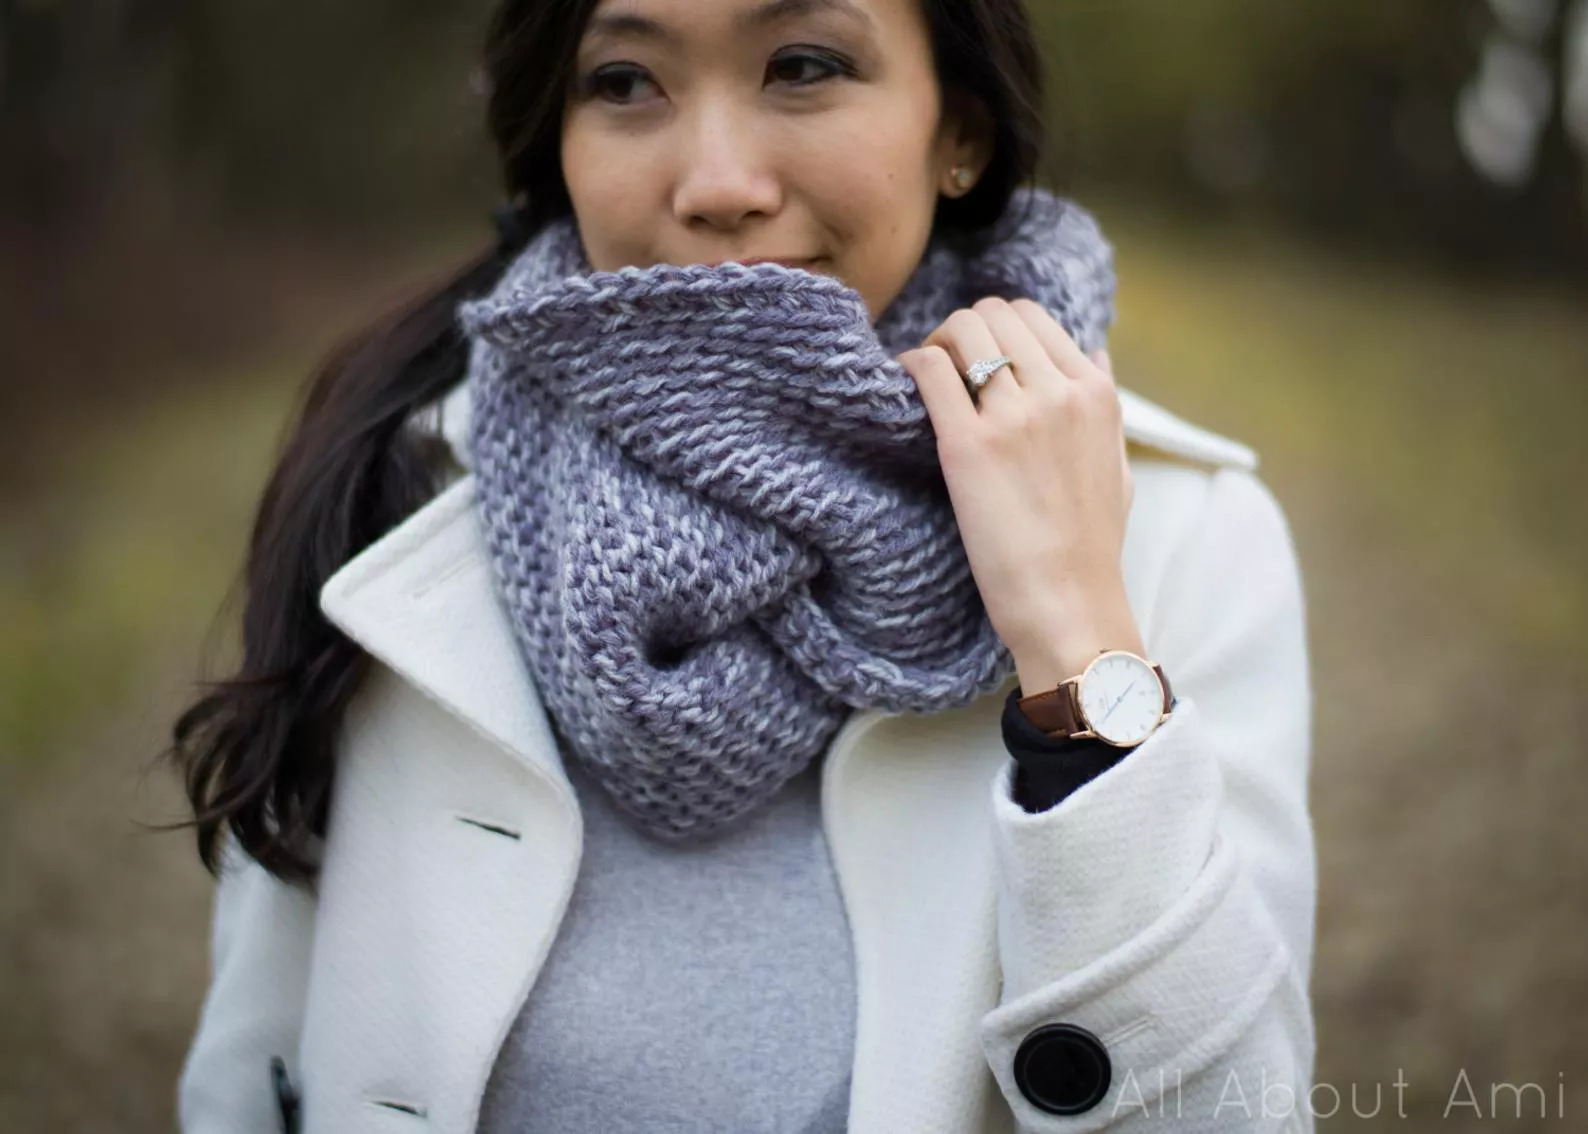 Stay Snug and Warm in a Crocheted Cowl